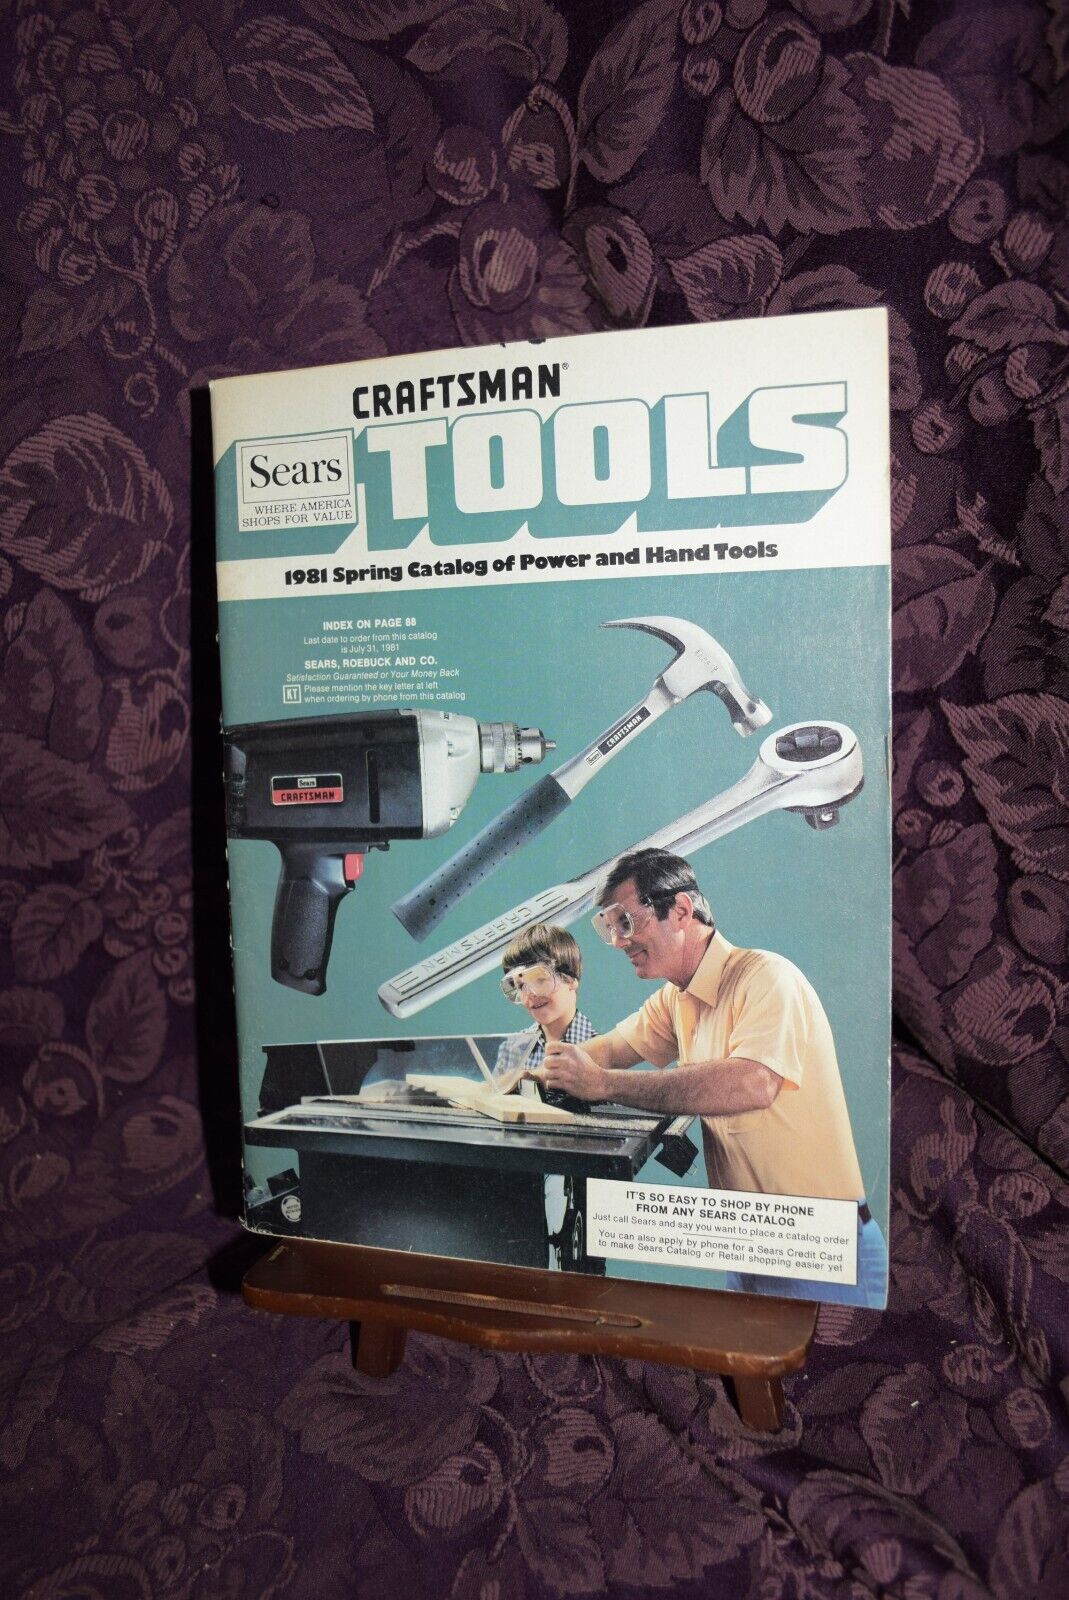 Sears Craftsman Power and Hand Tools catalog Spring 1981  B & W & Color